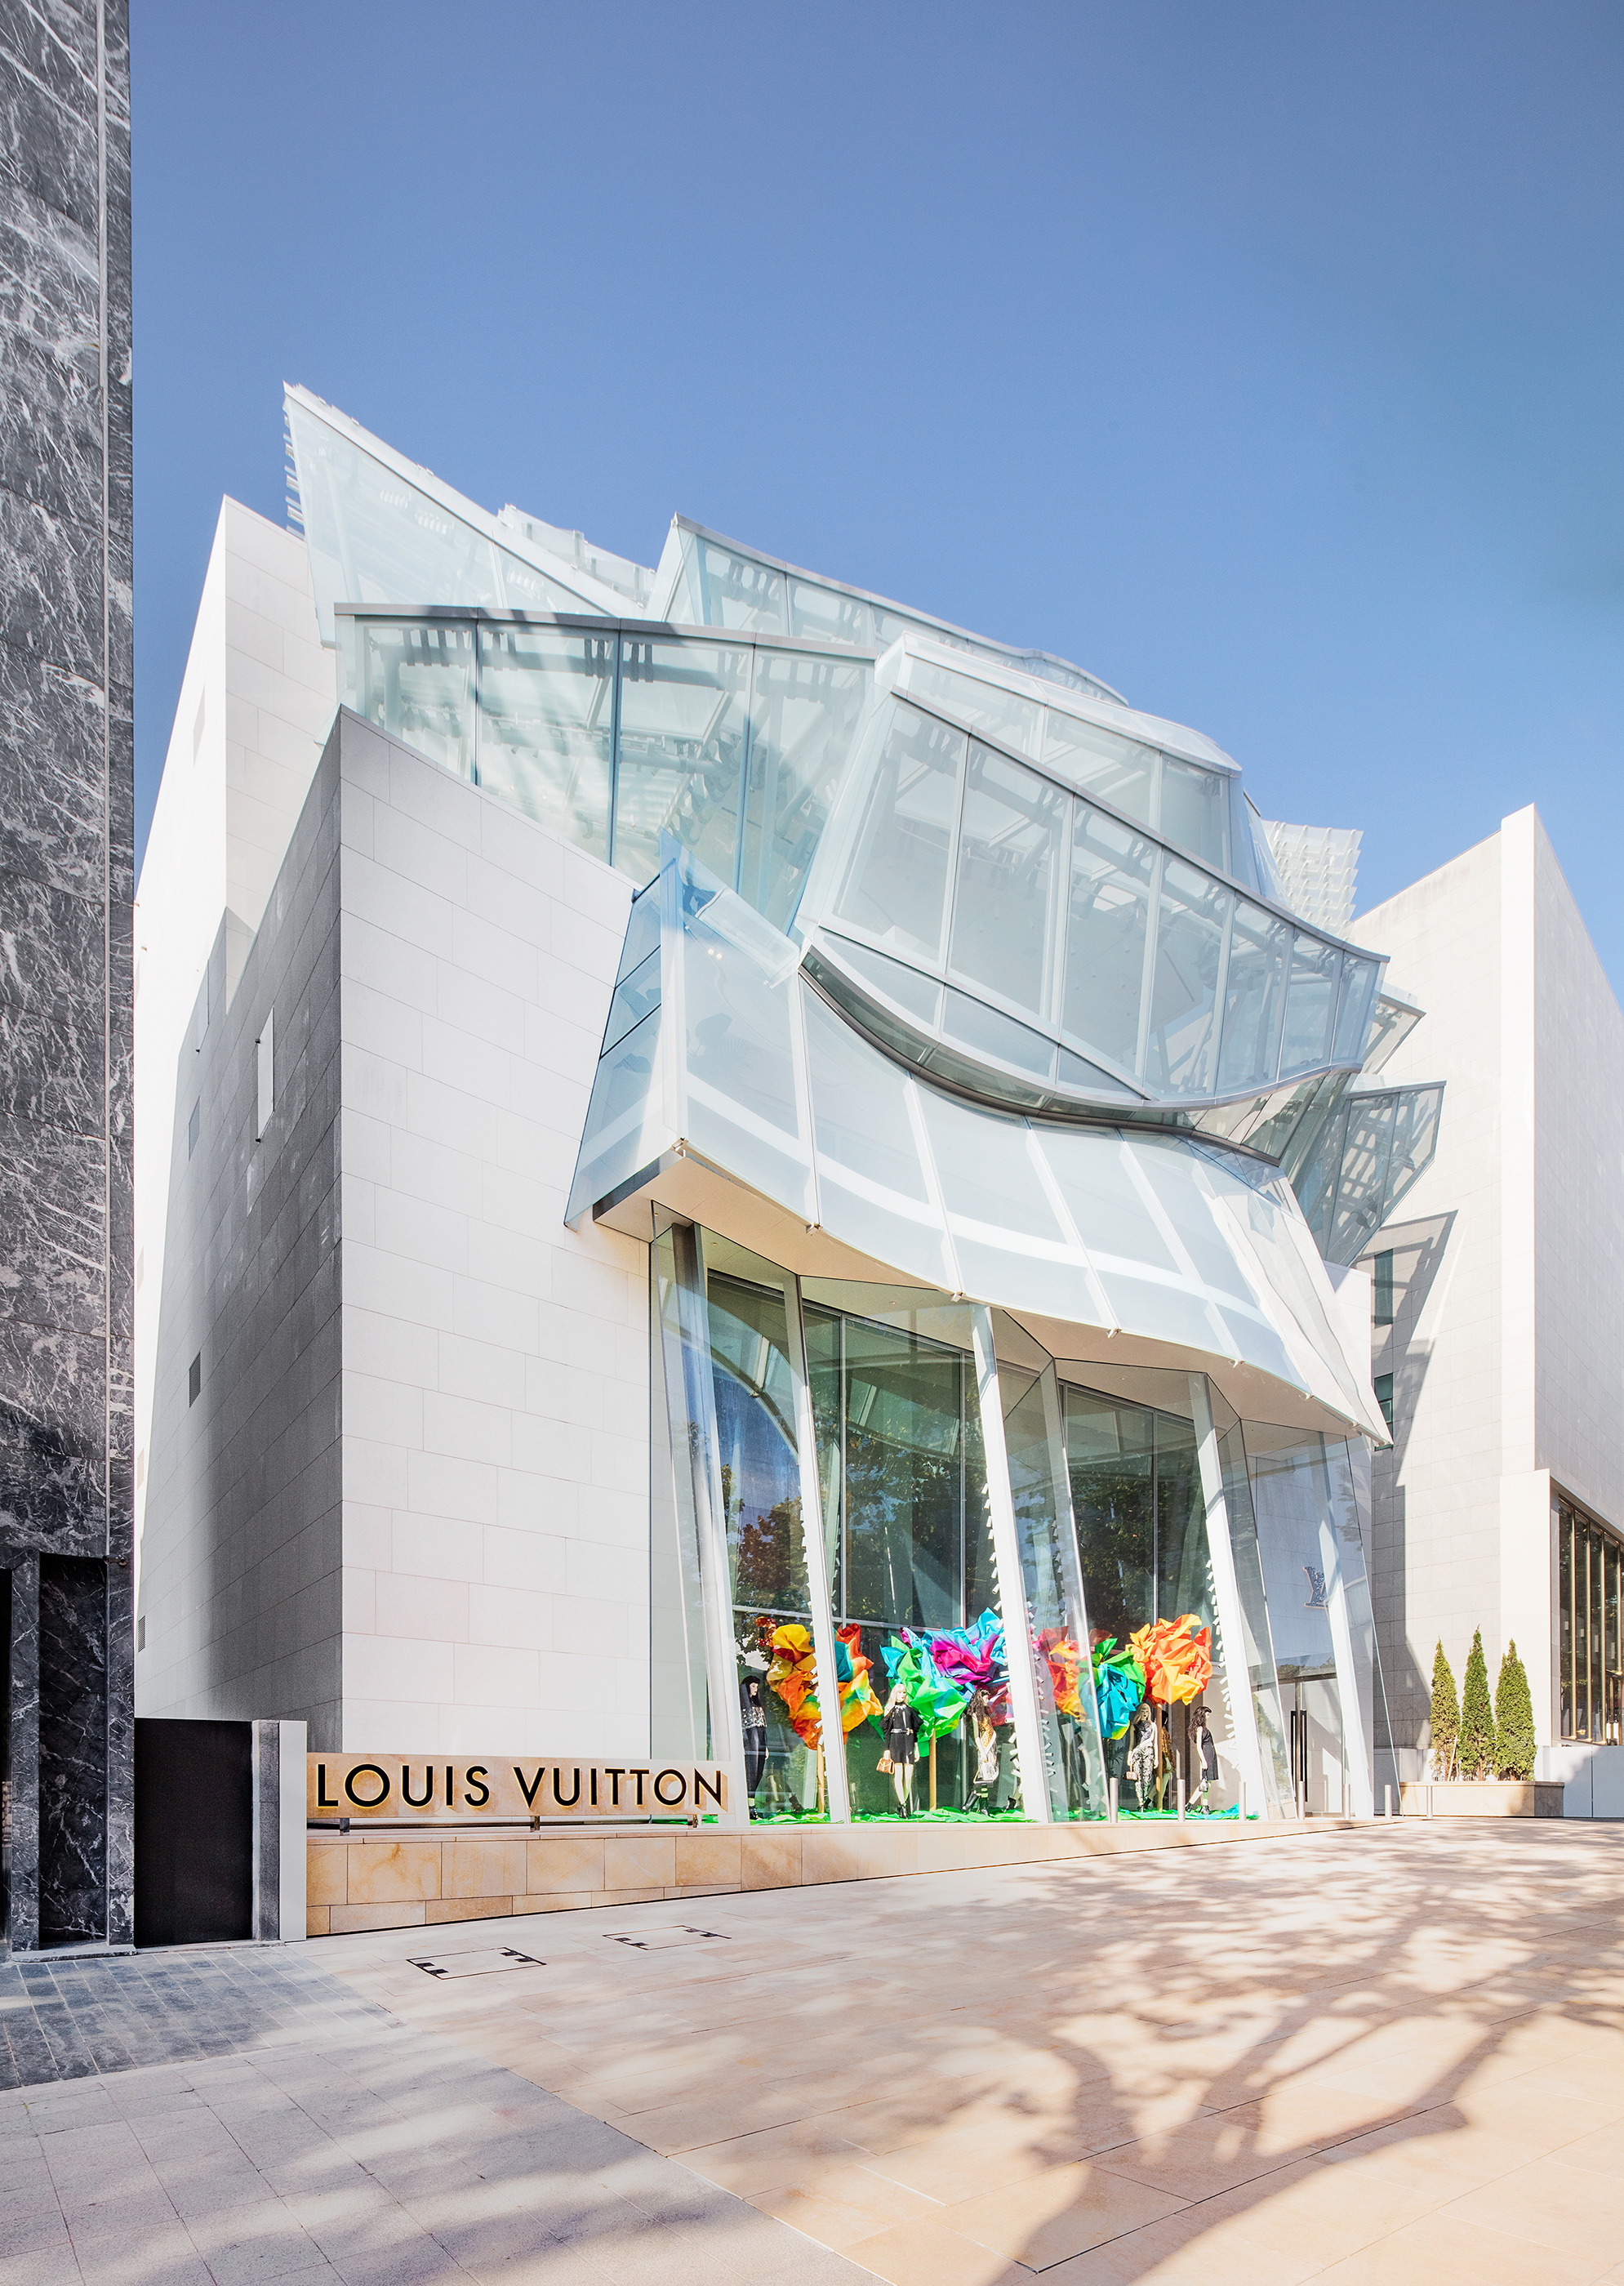 Inauguration of Louis Vuitton Maison Seoul celebrates spectacular  collaboration with architects Frank Gehry and Peter Marino - LVMH